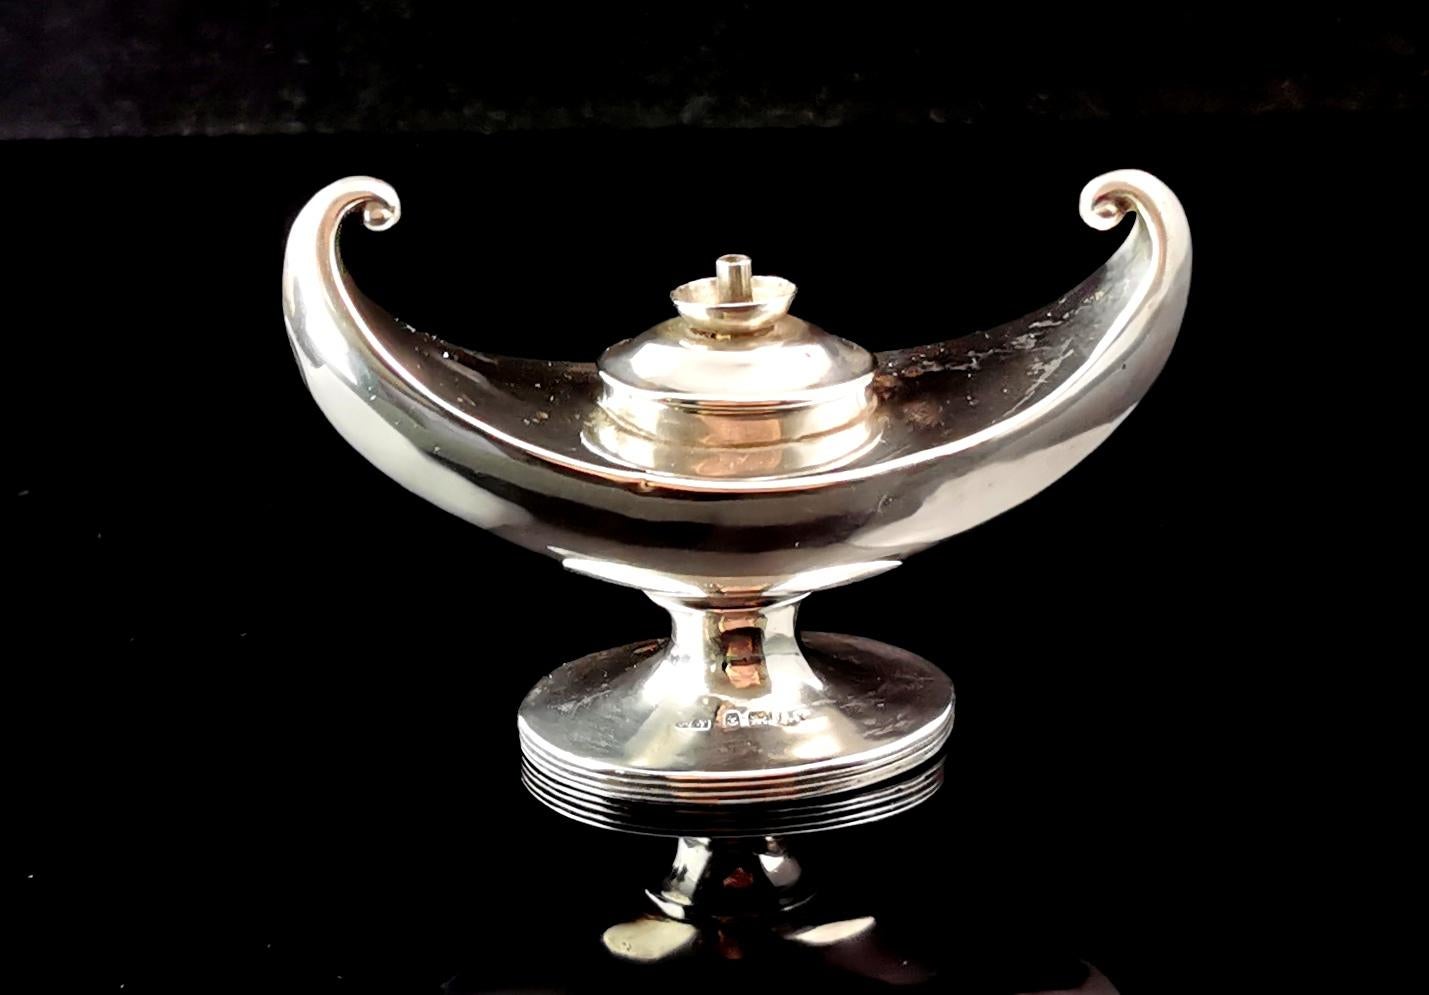 A stylish Antique Art Deco era sterling silver lamp form table lighter.

An unusual genie style lamp curved at both ends with an elongated boat shape.

It has a smooth polished finish and a lift out lid.

Designed to be used with a liquid fuel and